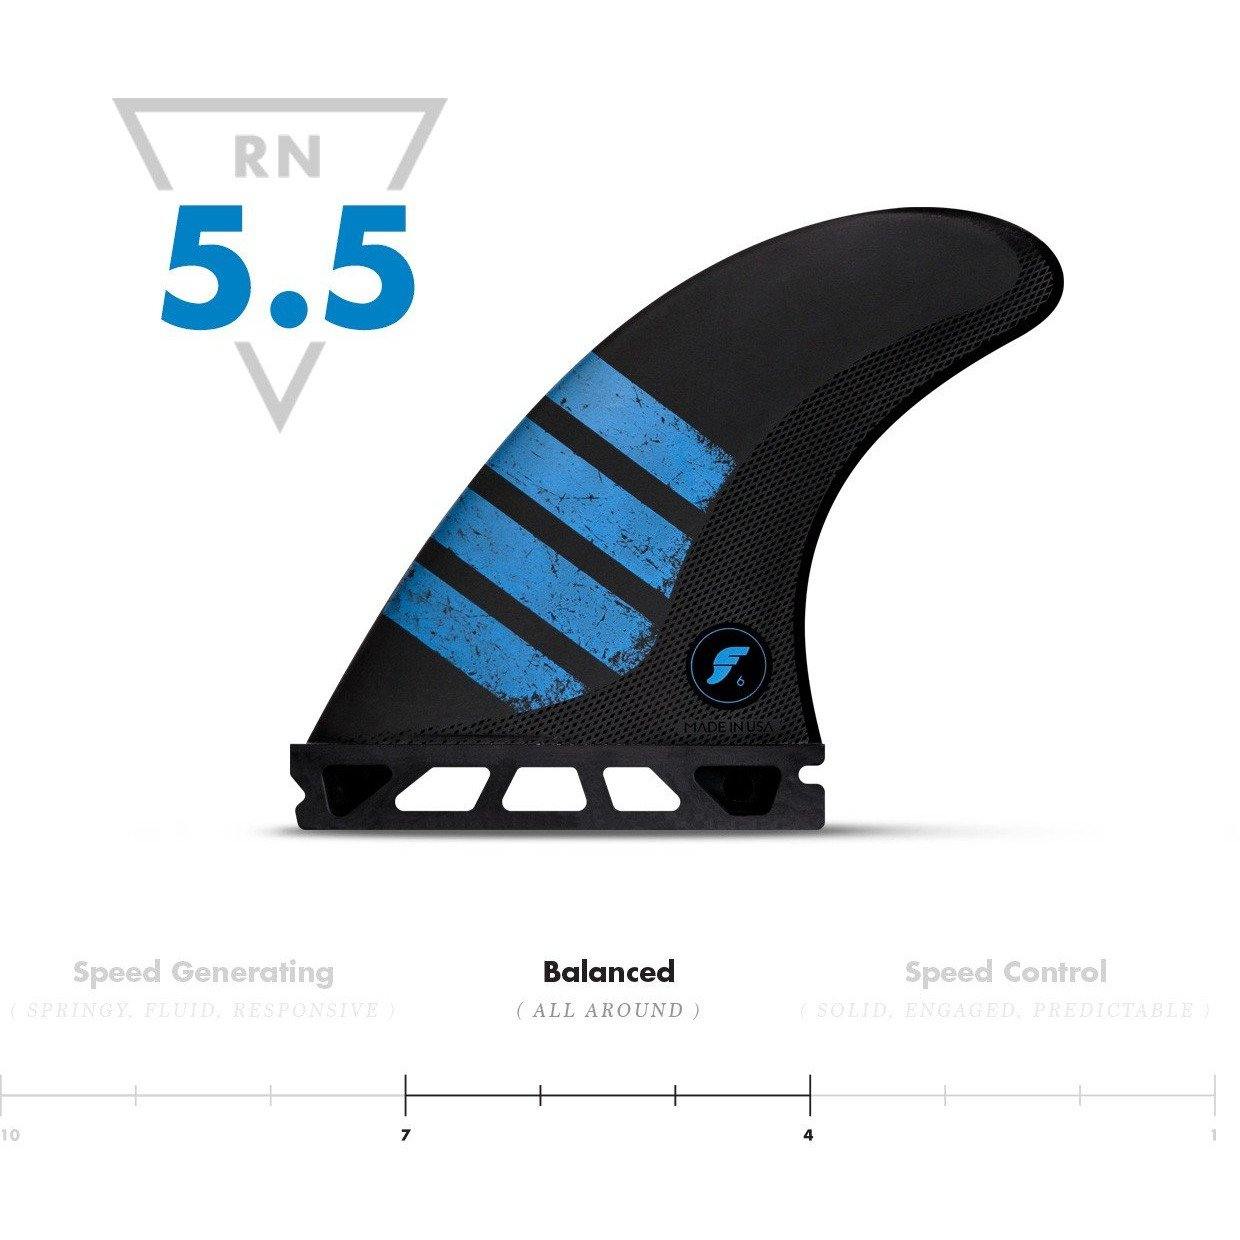 Futures Fins F6 Thermotech